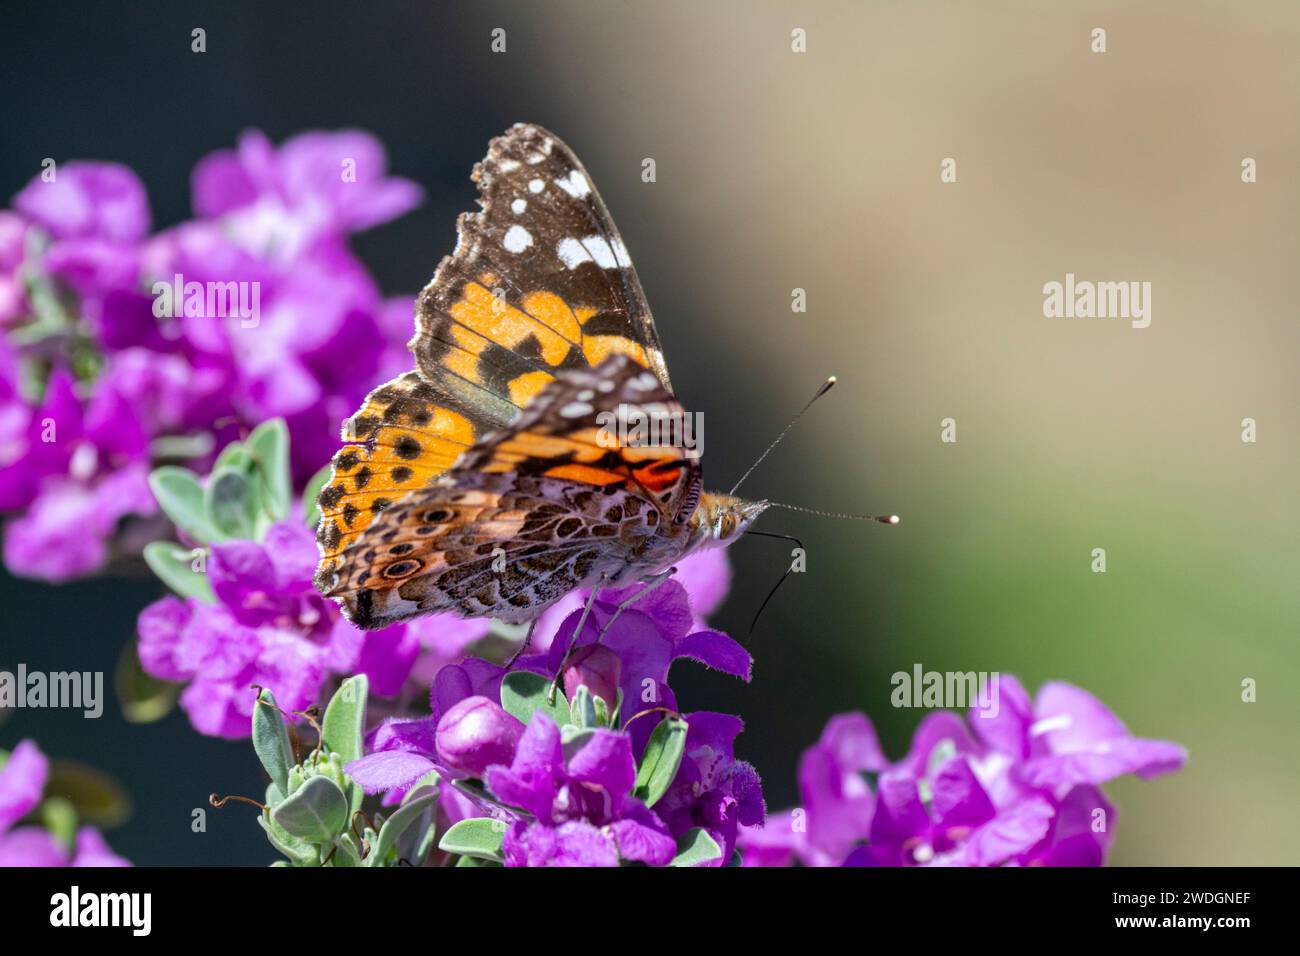 A painted lady (Vanessa cardui) or cosmopolitan butterfly feeds on a barometer bush (Leucophyllum frutescens). Stock Photo